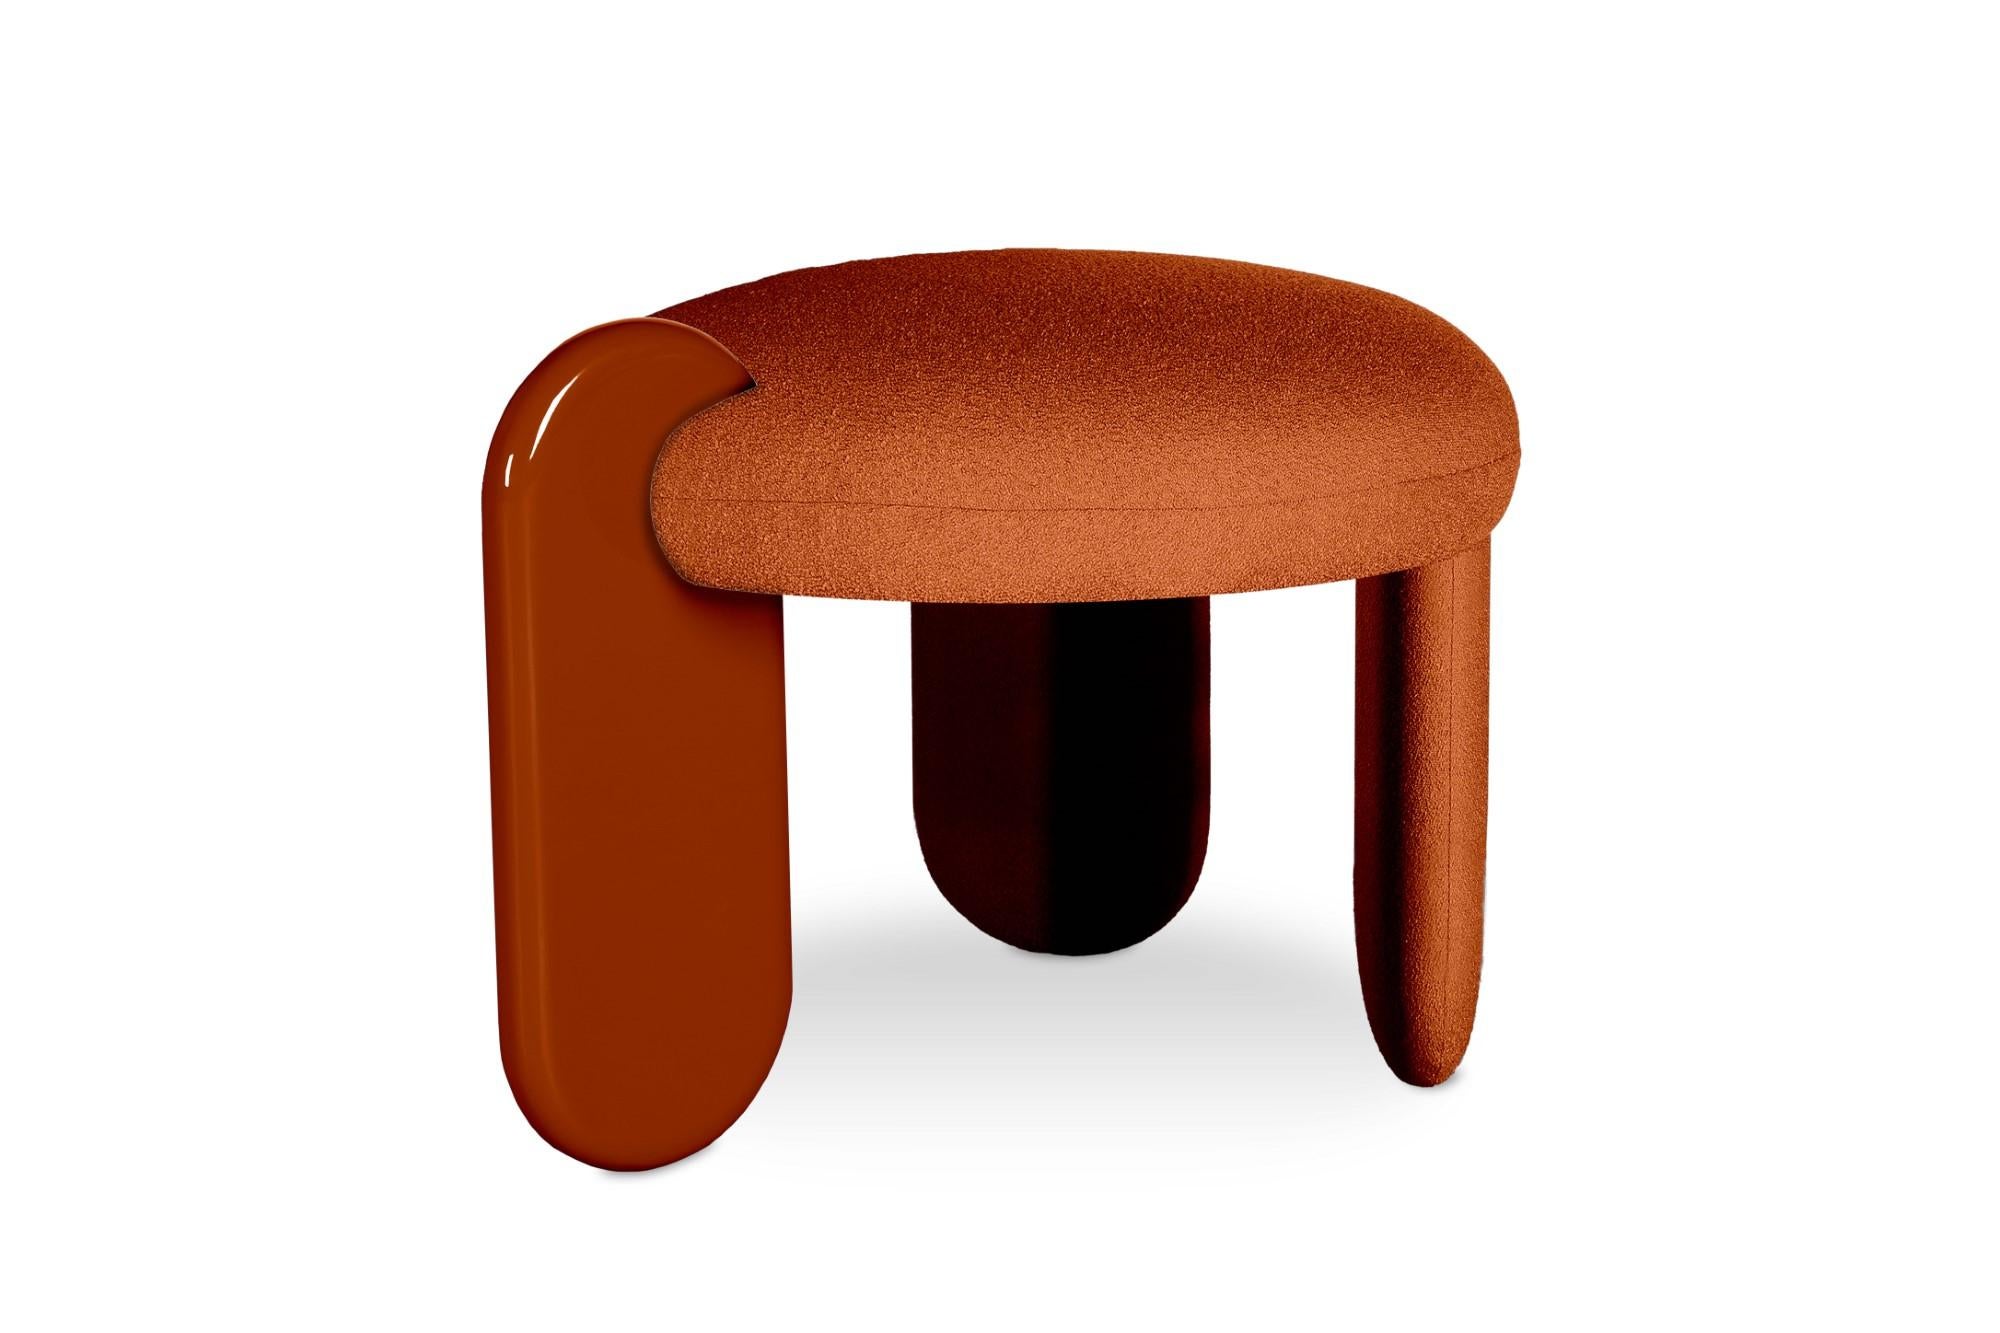 Glazy stool by Royal Stranger
Dimensions: Width 68.5cm, height 50cm, depth 60cm
Materials: Solid wood frame, foam, upholstery.
Sanguine color from the Fabrics Main Collection LAGO.
Also available in other leg colors, Royal Stranger’s fabrics and